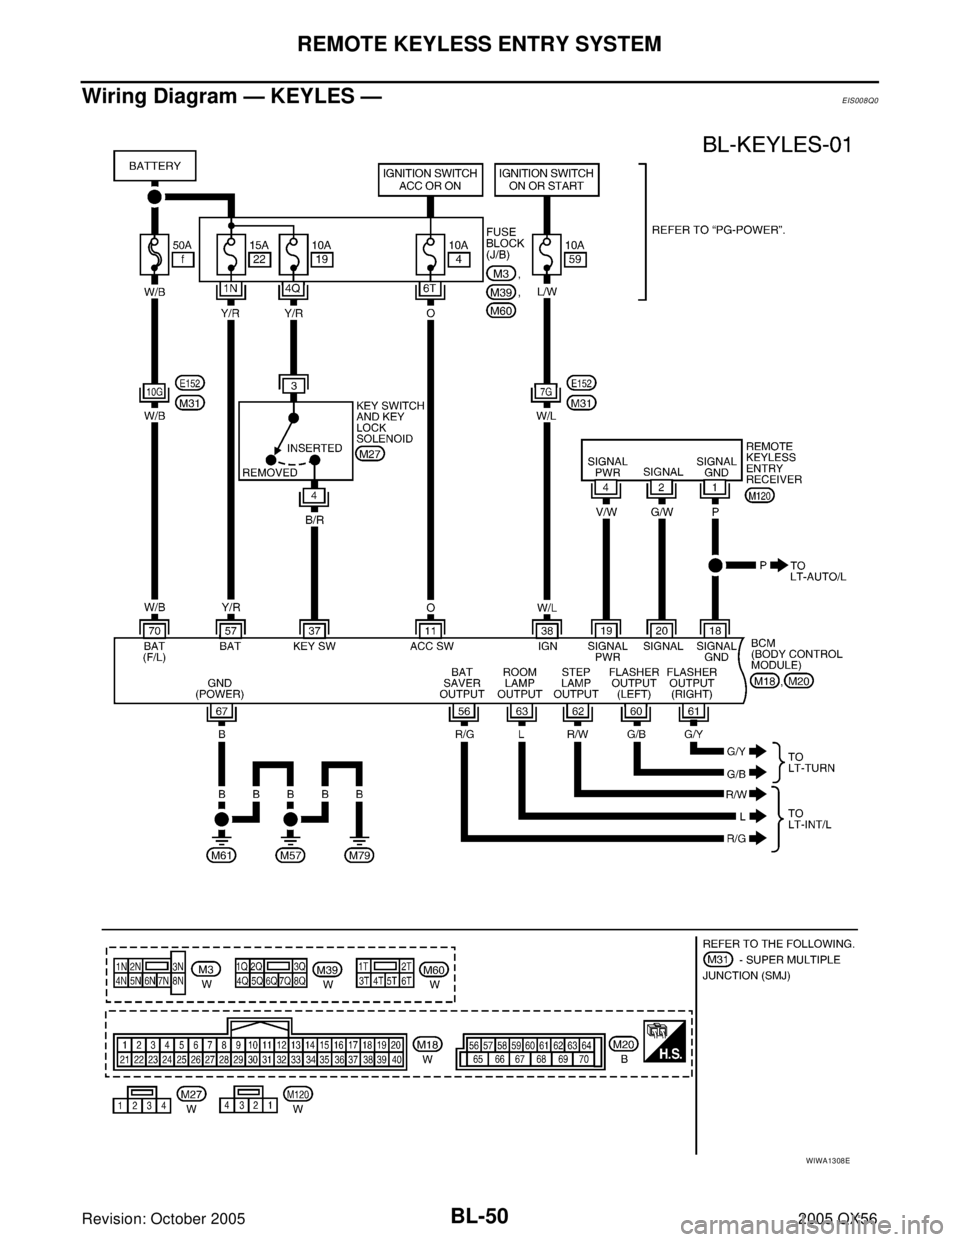 INFINITI QX4 2005  Factory Owners Guide BL-50
REMOTE KEYLESS ENTRY SYSTEM
Revision: October 20052005 QX56
Wiring Diagram — KEYLES —EIS008Q0
WIWA1308E 